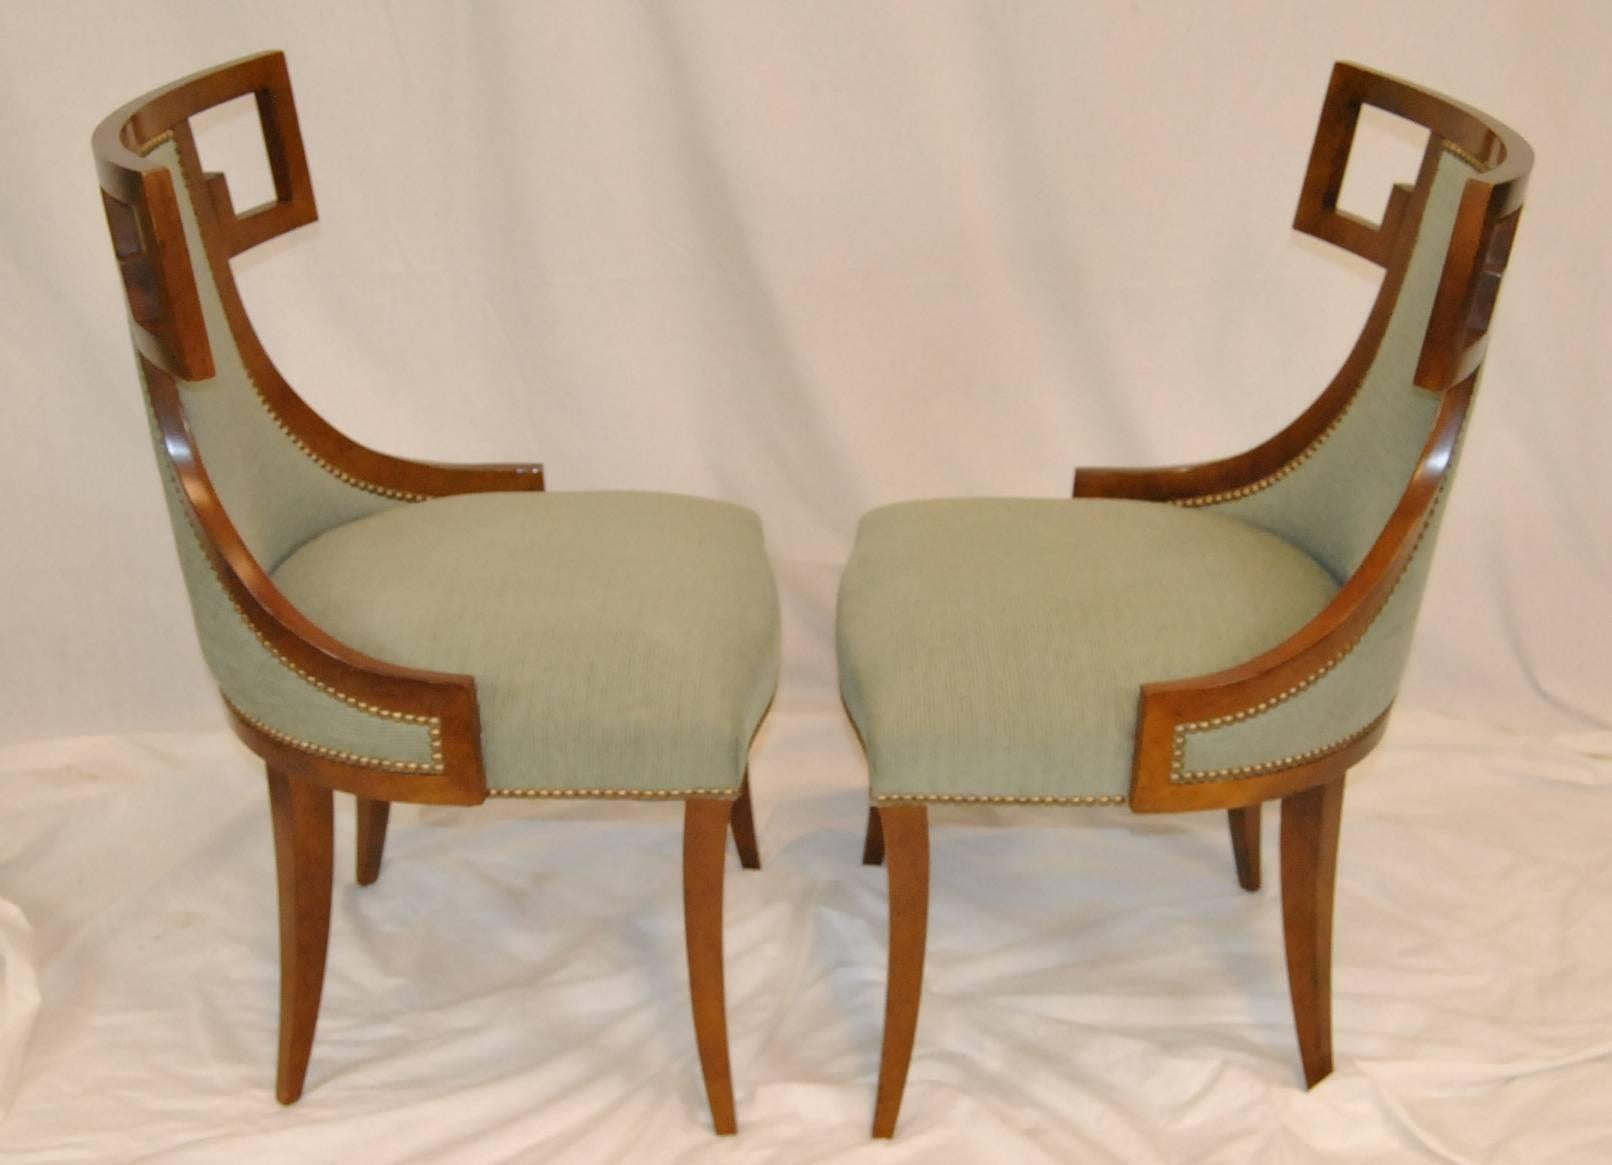 This is the Greek dining chair model #6341 designed by Thomas Peasant for Baker Furniture. Very elegant lines with Greek Key feature at crown. Upholstery is seafoam green with nailhead accent. There are eight in the set. Each chair measures 36